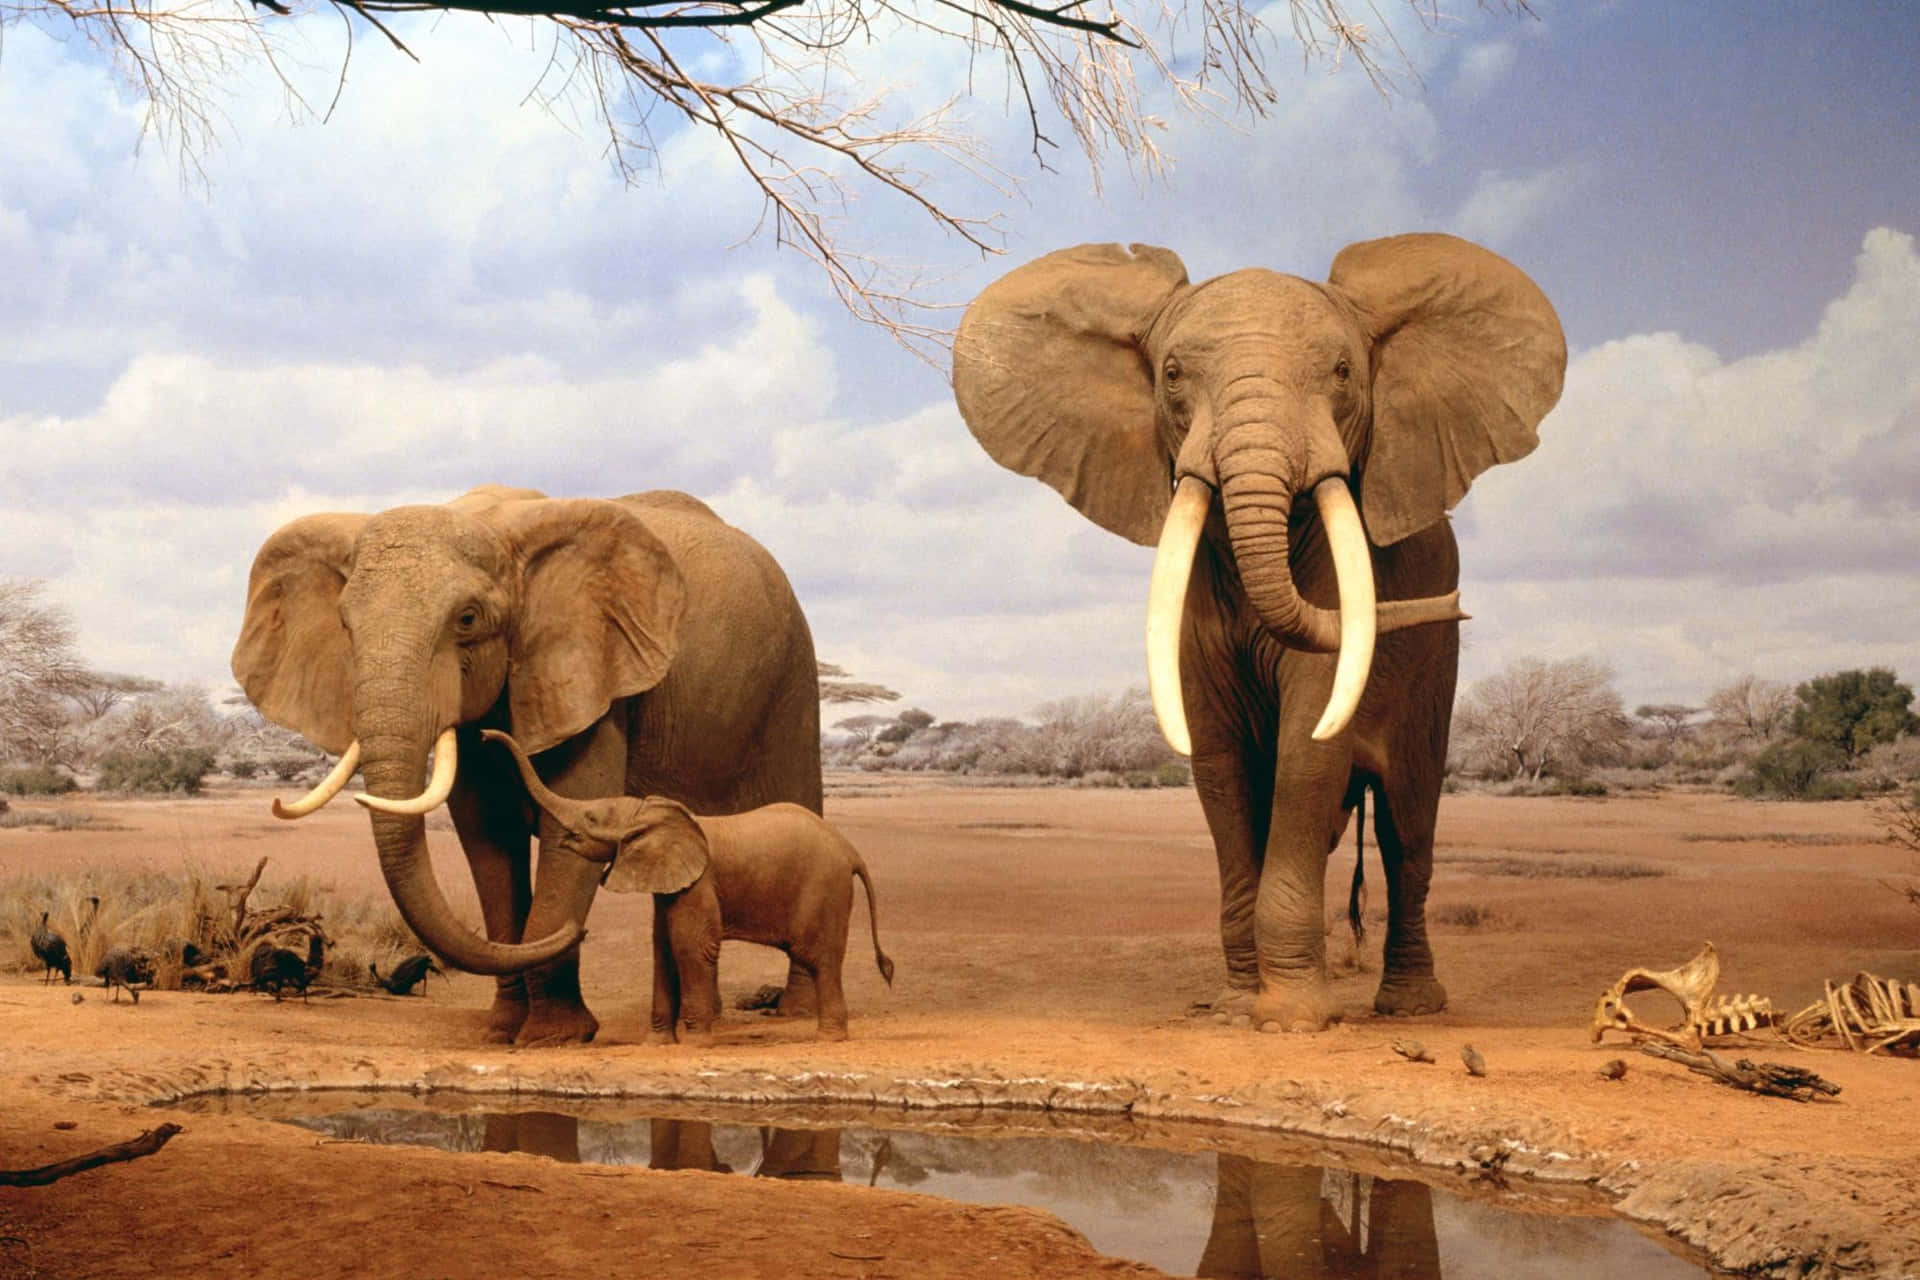 Large Ears Elephants Picture